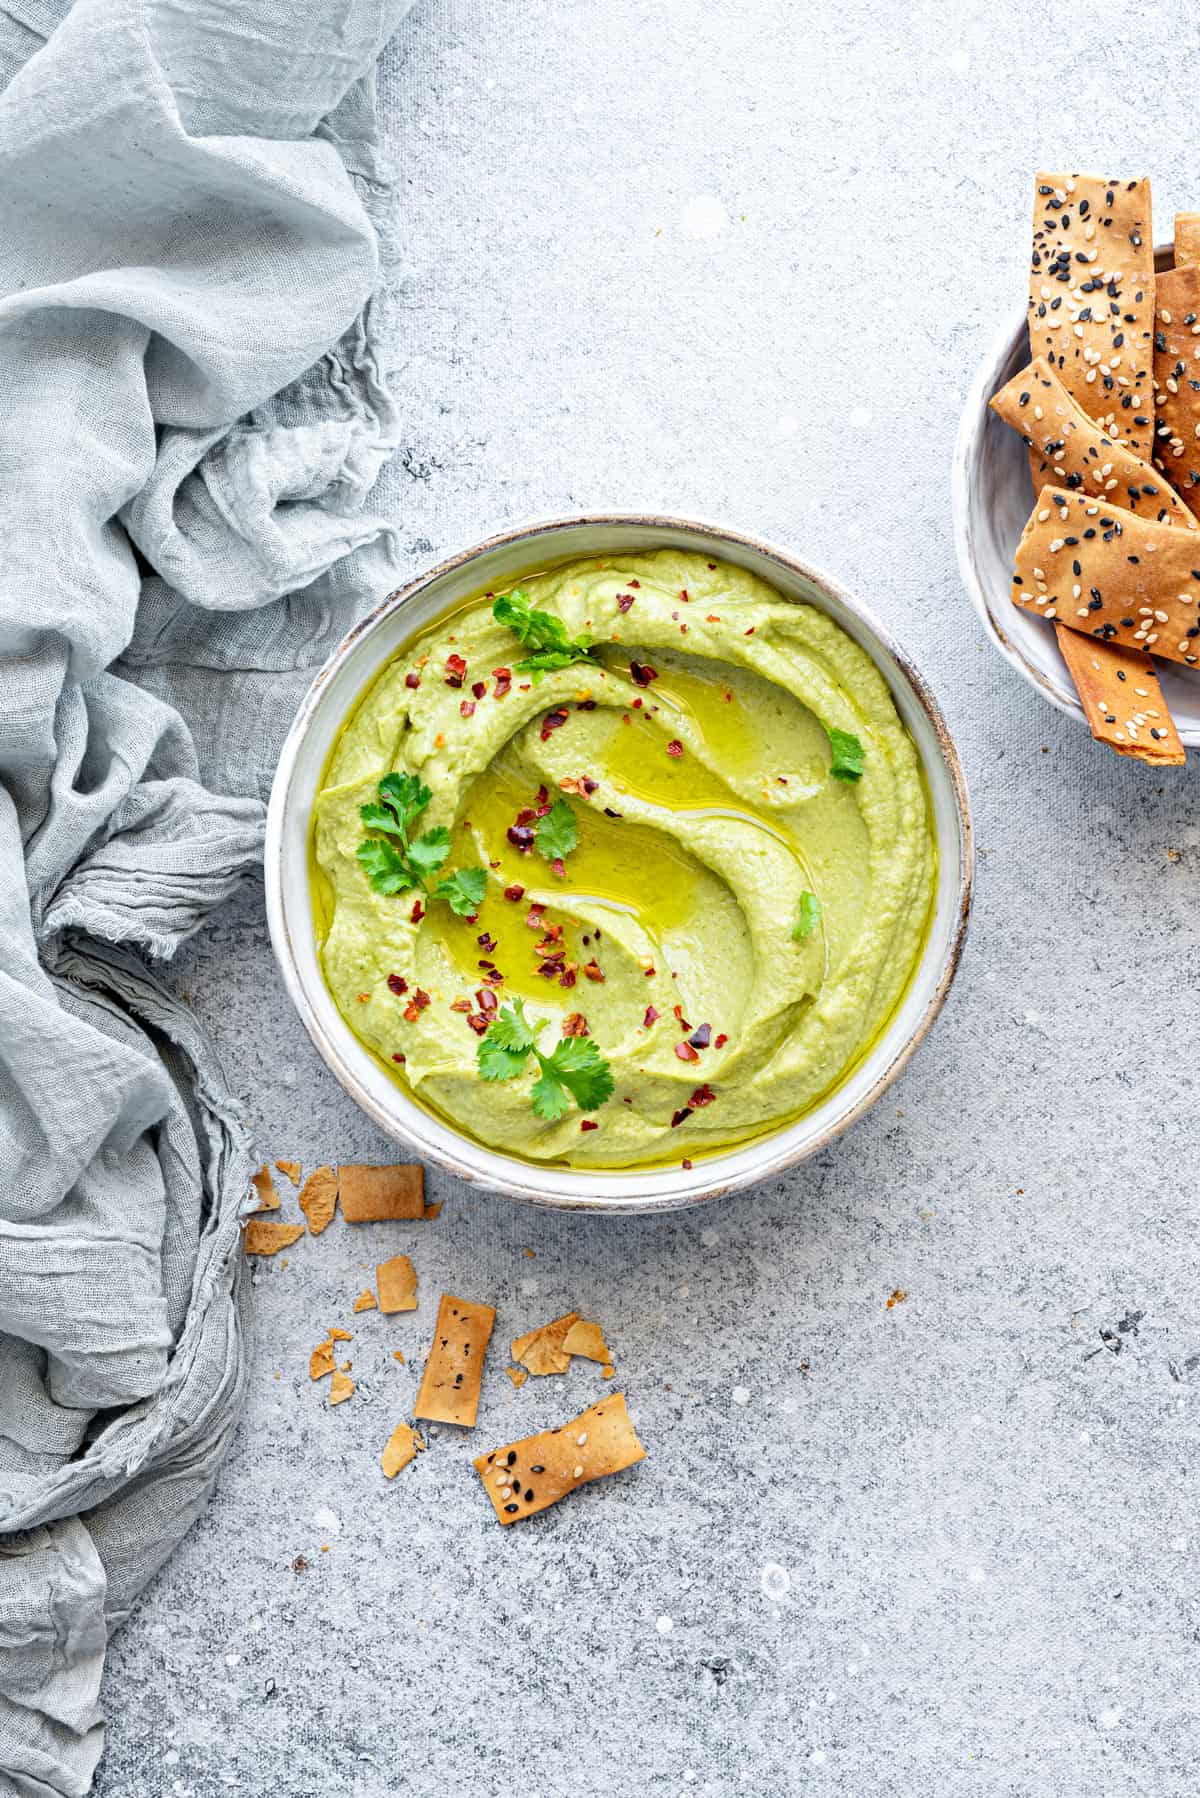 White bowl filled with creamy avocado hummus, topped with fresh cilantro and red pepper flakes. There are pieces of broken cracker scattered to the side.